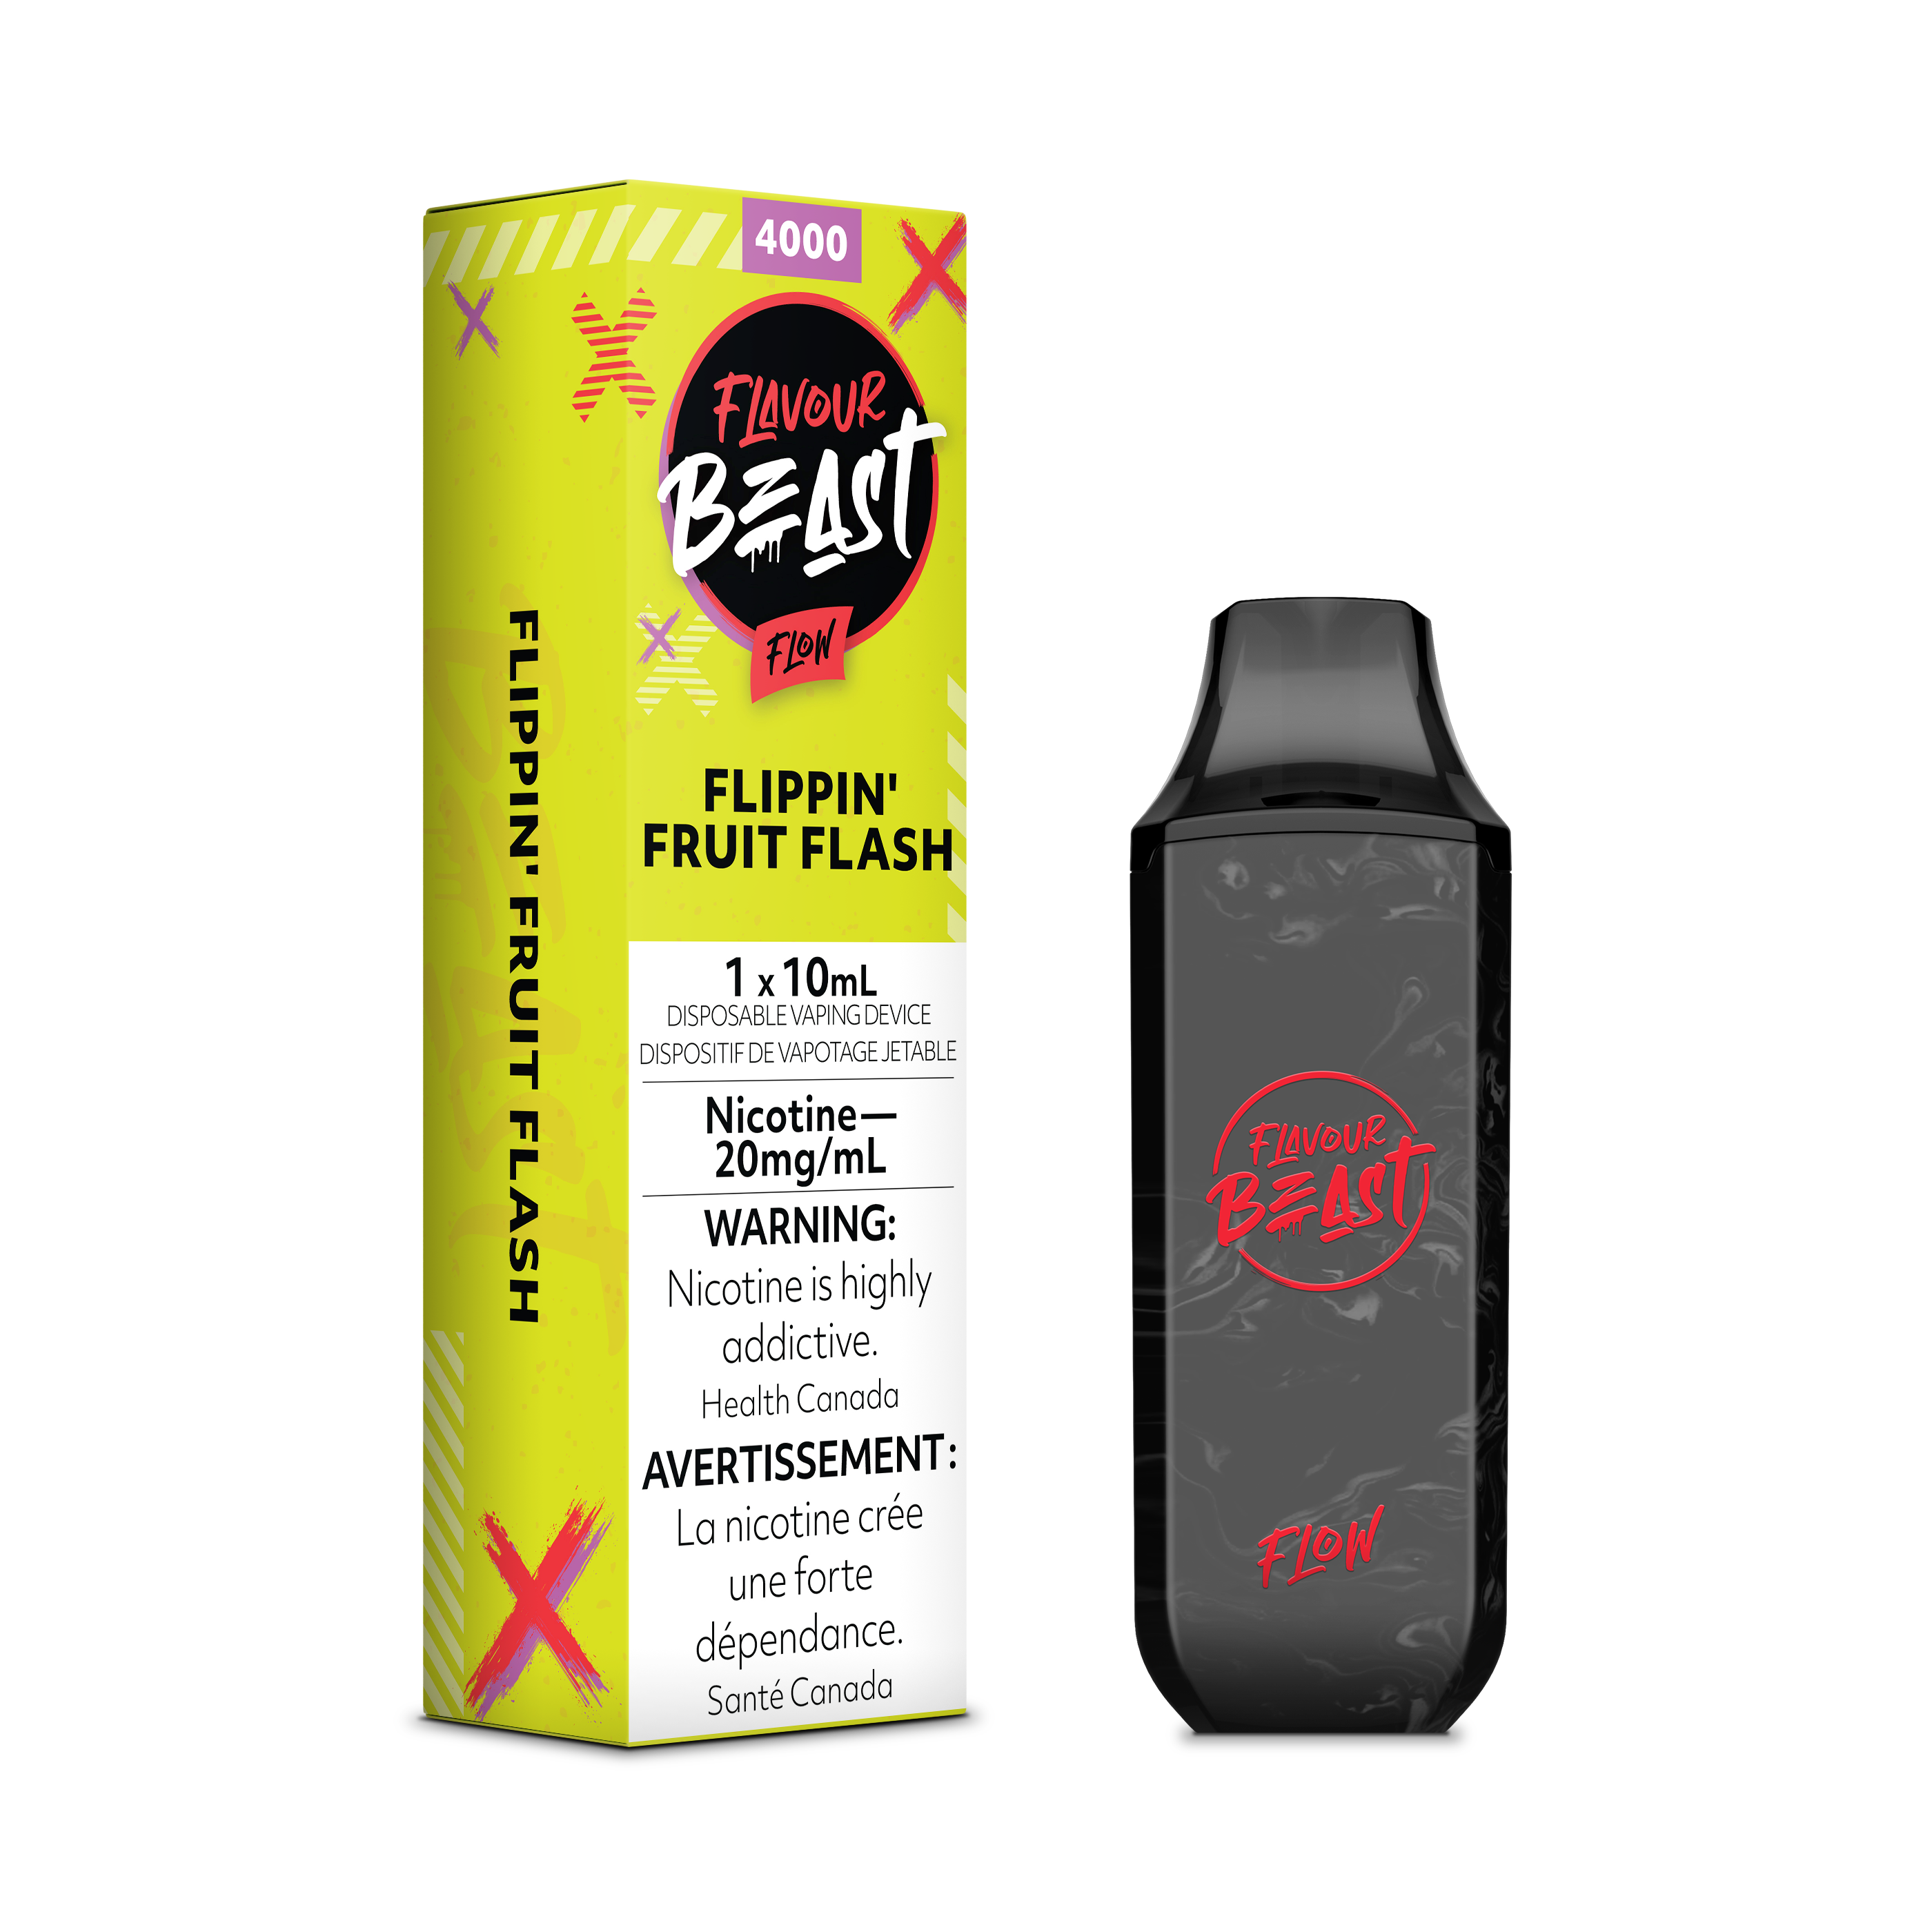 Flippin' Fruit Flash - Flavour Beast Flow 4000 - EXCISED